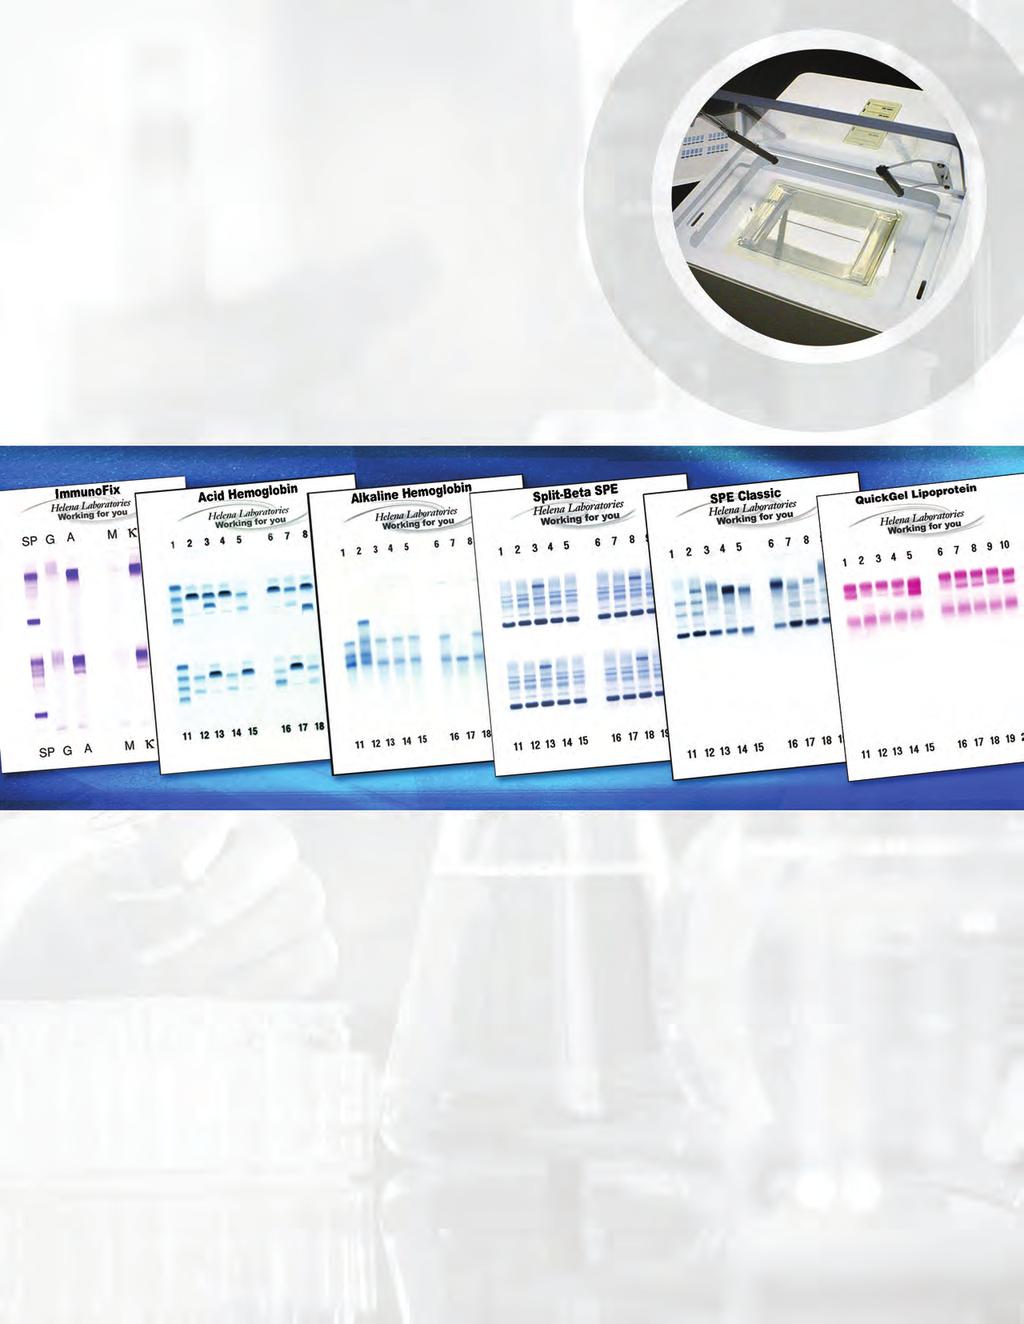 QuickGel Manual Electrophoresis QuickGel electrophoresis products are compact and easy to use, allowing cost-effective manual separations without sacrificing quality or accuracy.